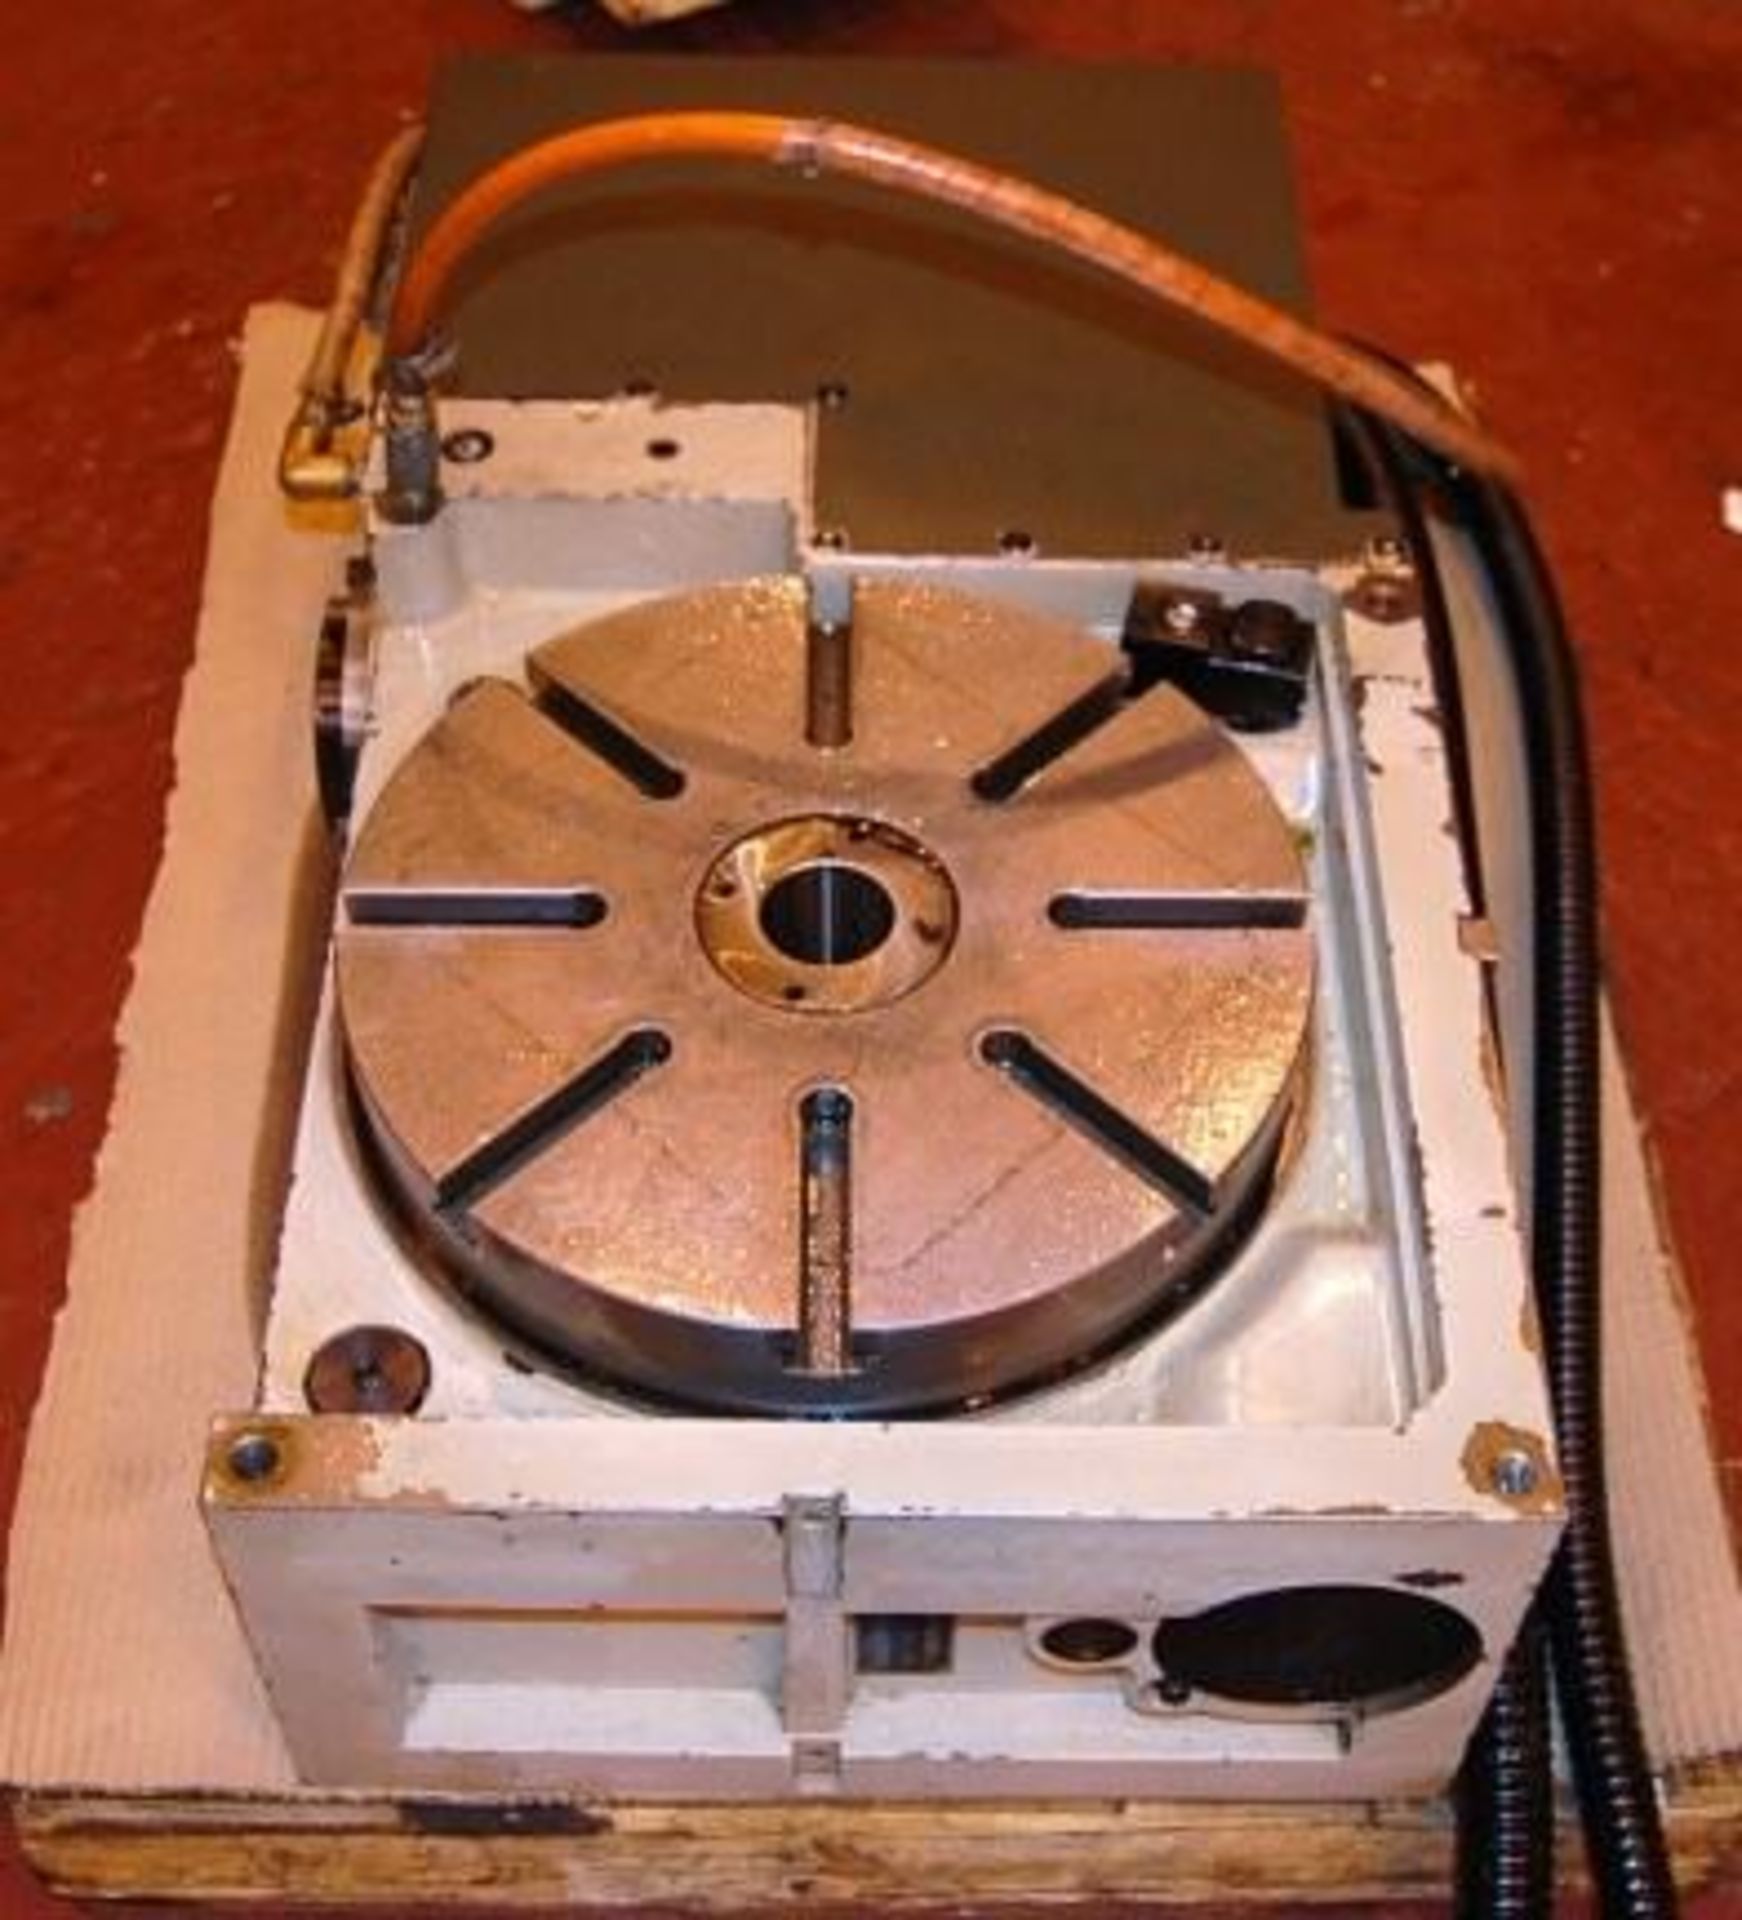 12.5" MITSUI SEIKI Model NCT320i CNC 4th Axis Rotary Table - Image 3 of 5